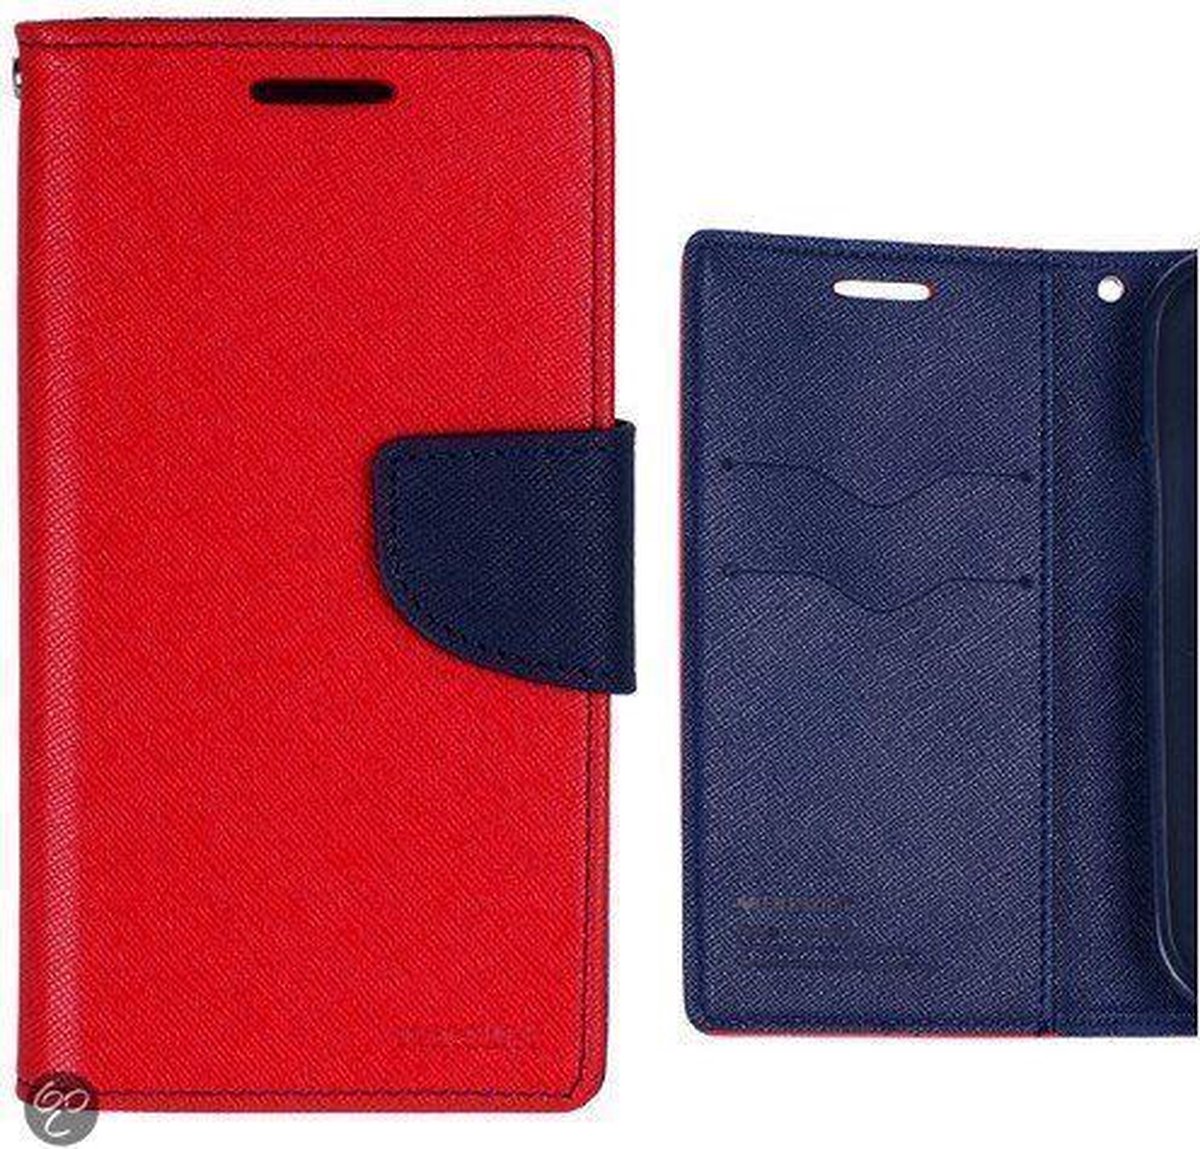 Mercury Diary case cover hoesje iPhone 5/5S rood/blauw